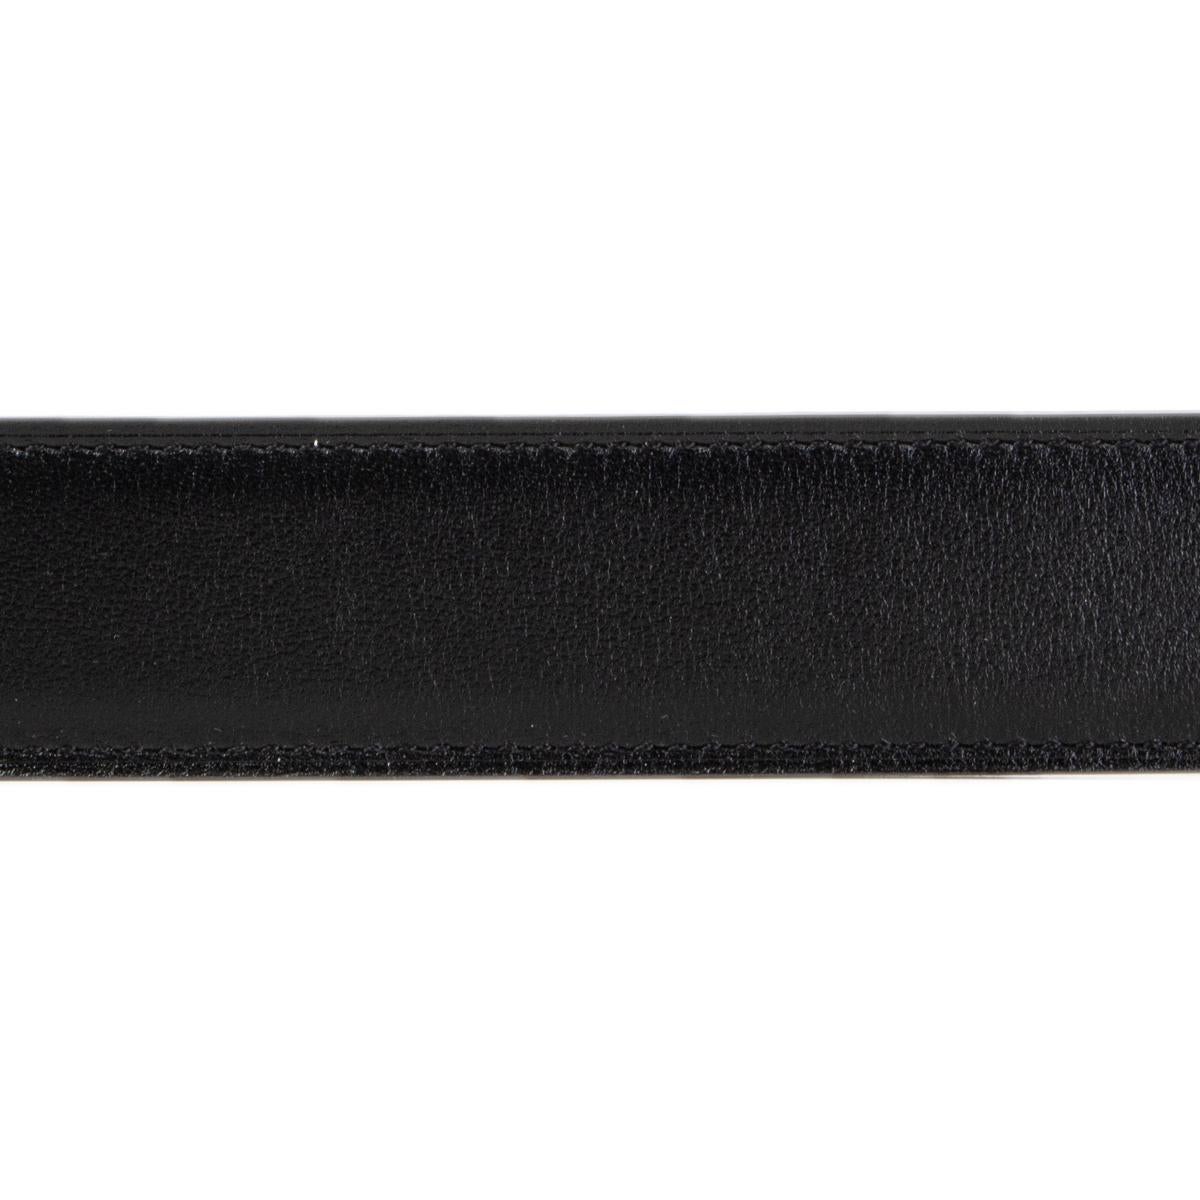 100% auth Hermes 32mm reversible belt strap Noir (black) Veau and Chocolat Veau Togo leather. Brand new. Comes with box.

Tag Size 105
Width 3.2cm (1.2in)
Fits 102cm (39.8in) to 107cm (41.7in)

All our listings include only the listed item unless